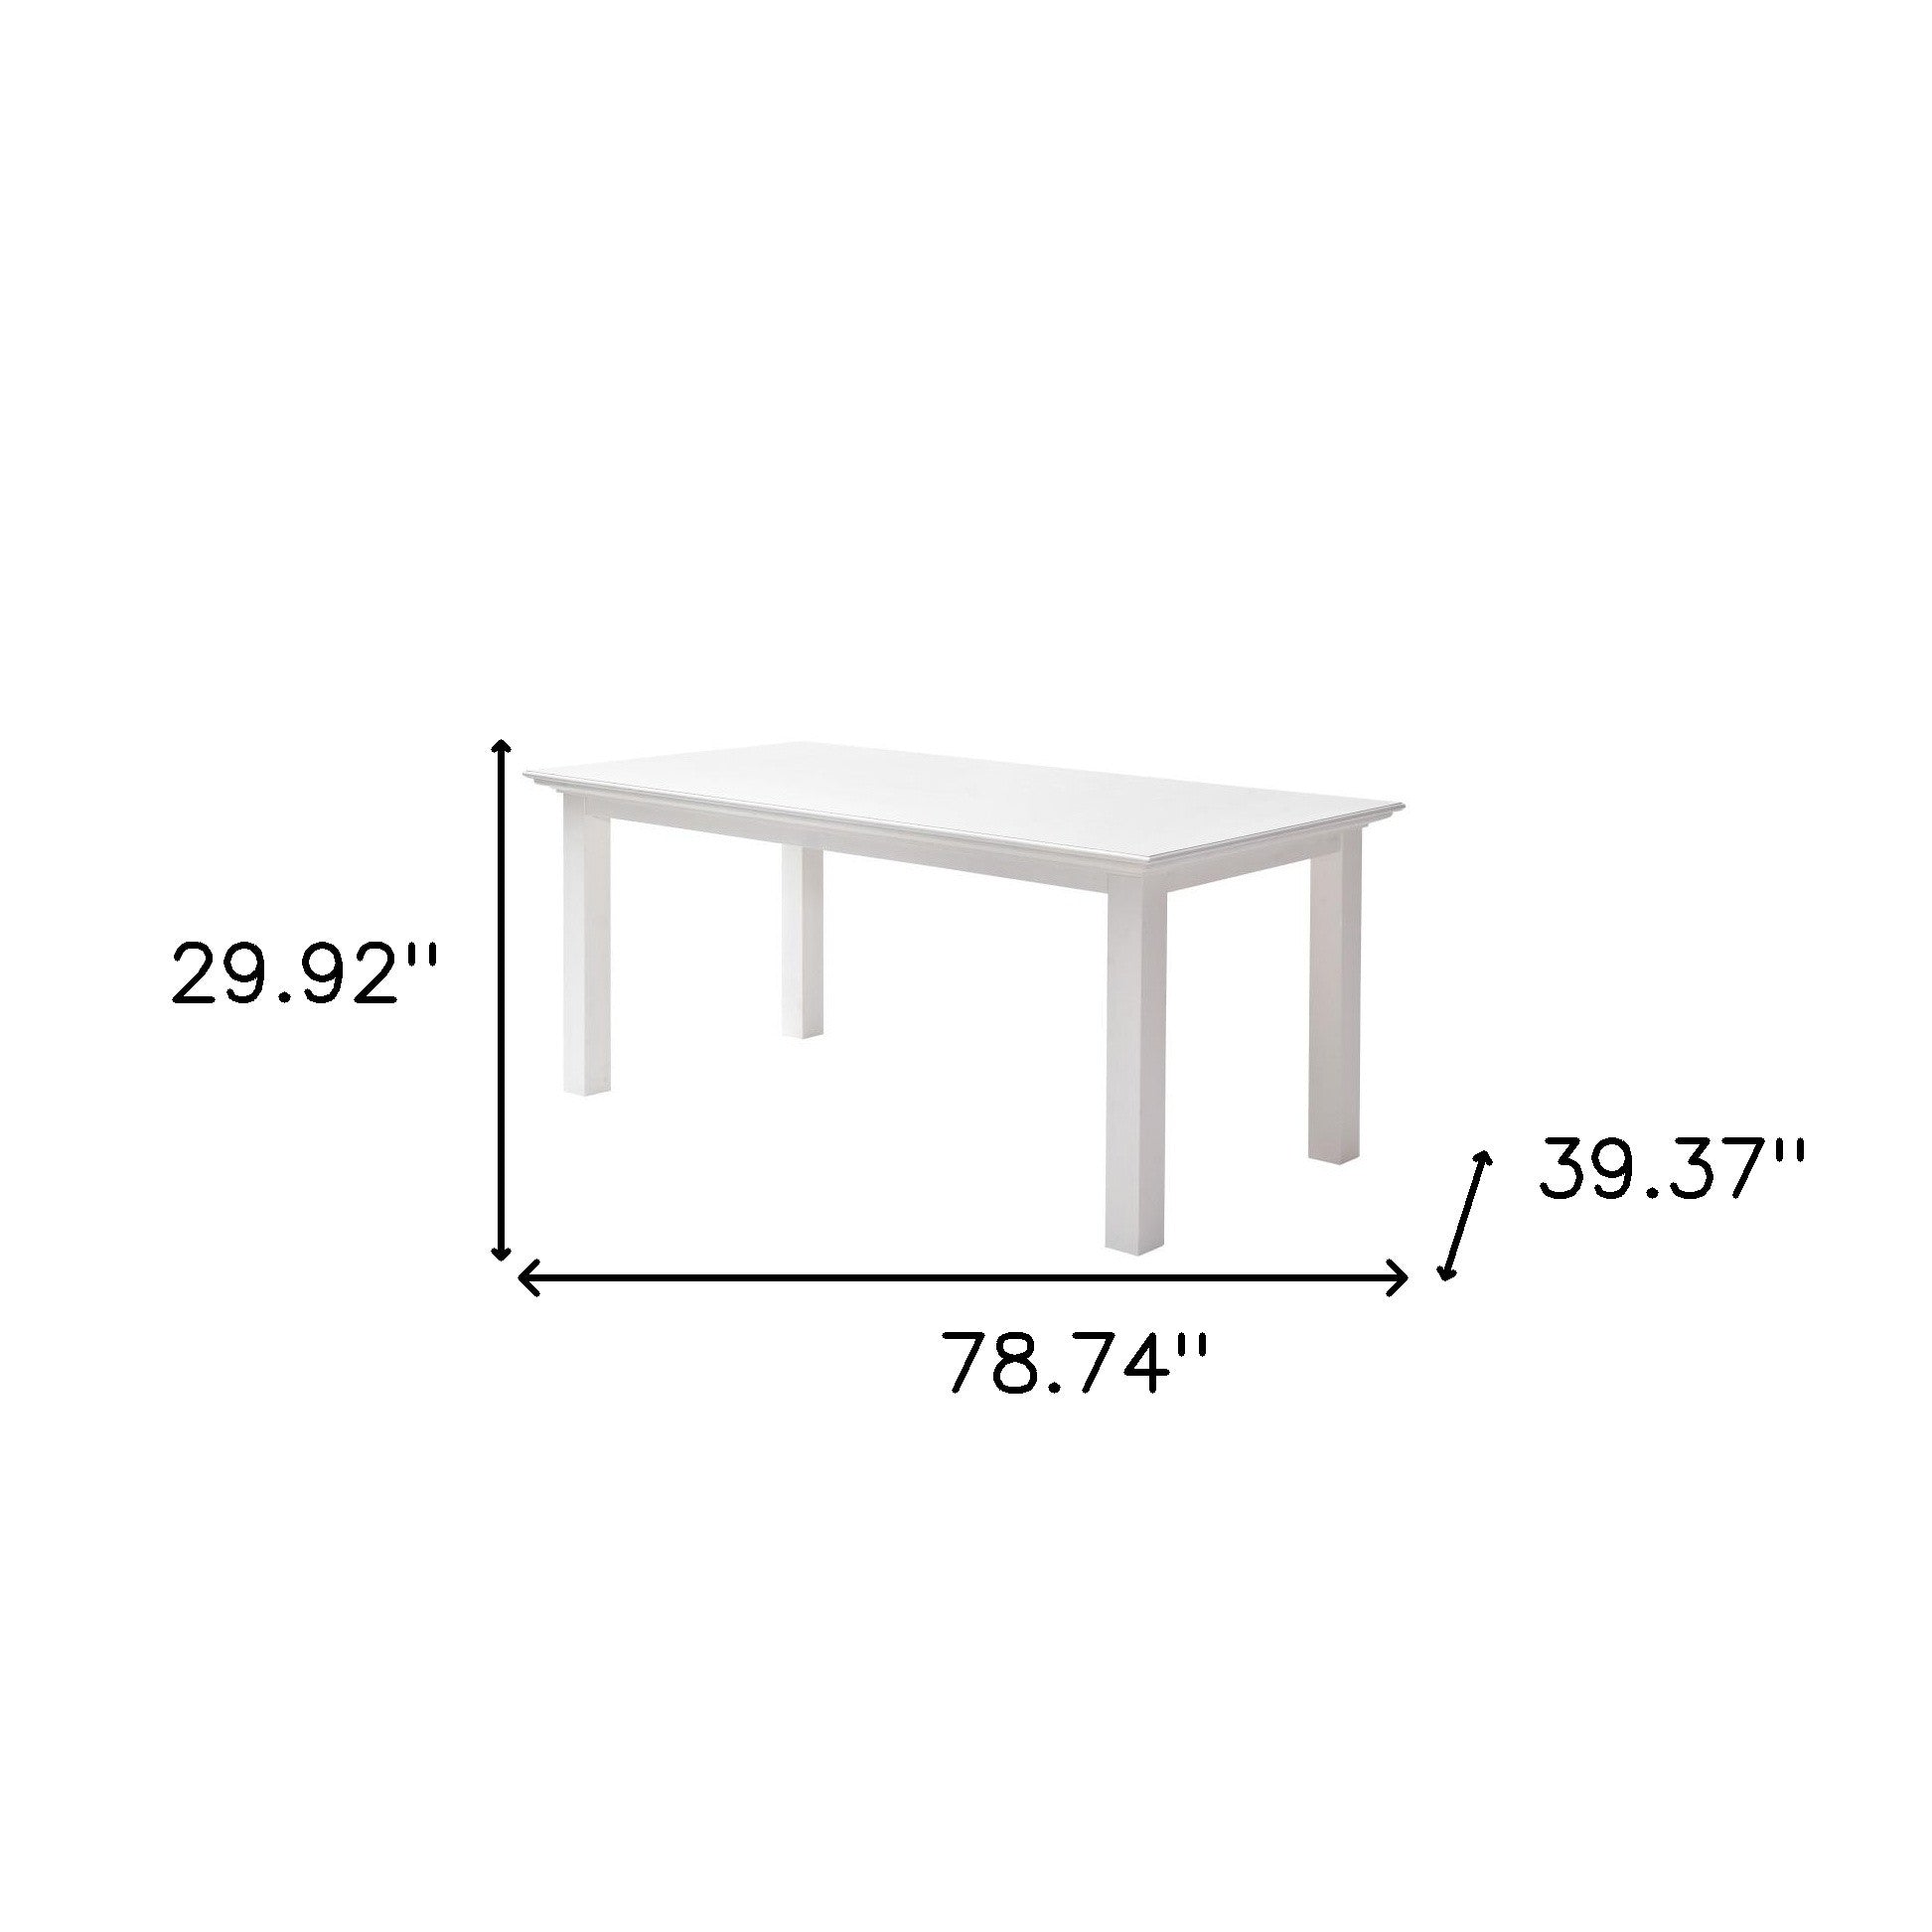 79" White Solid Wood Dining Table